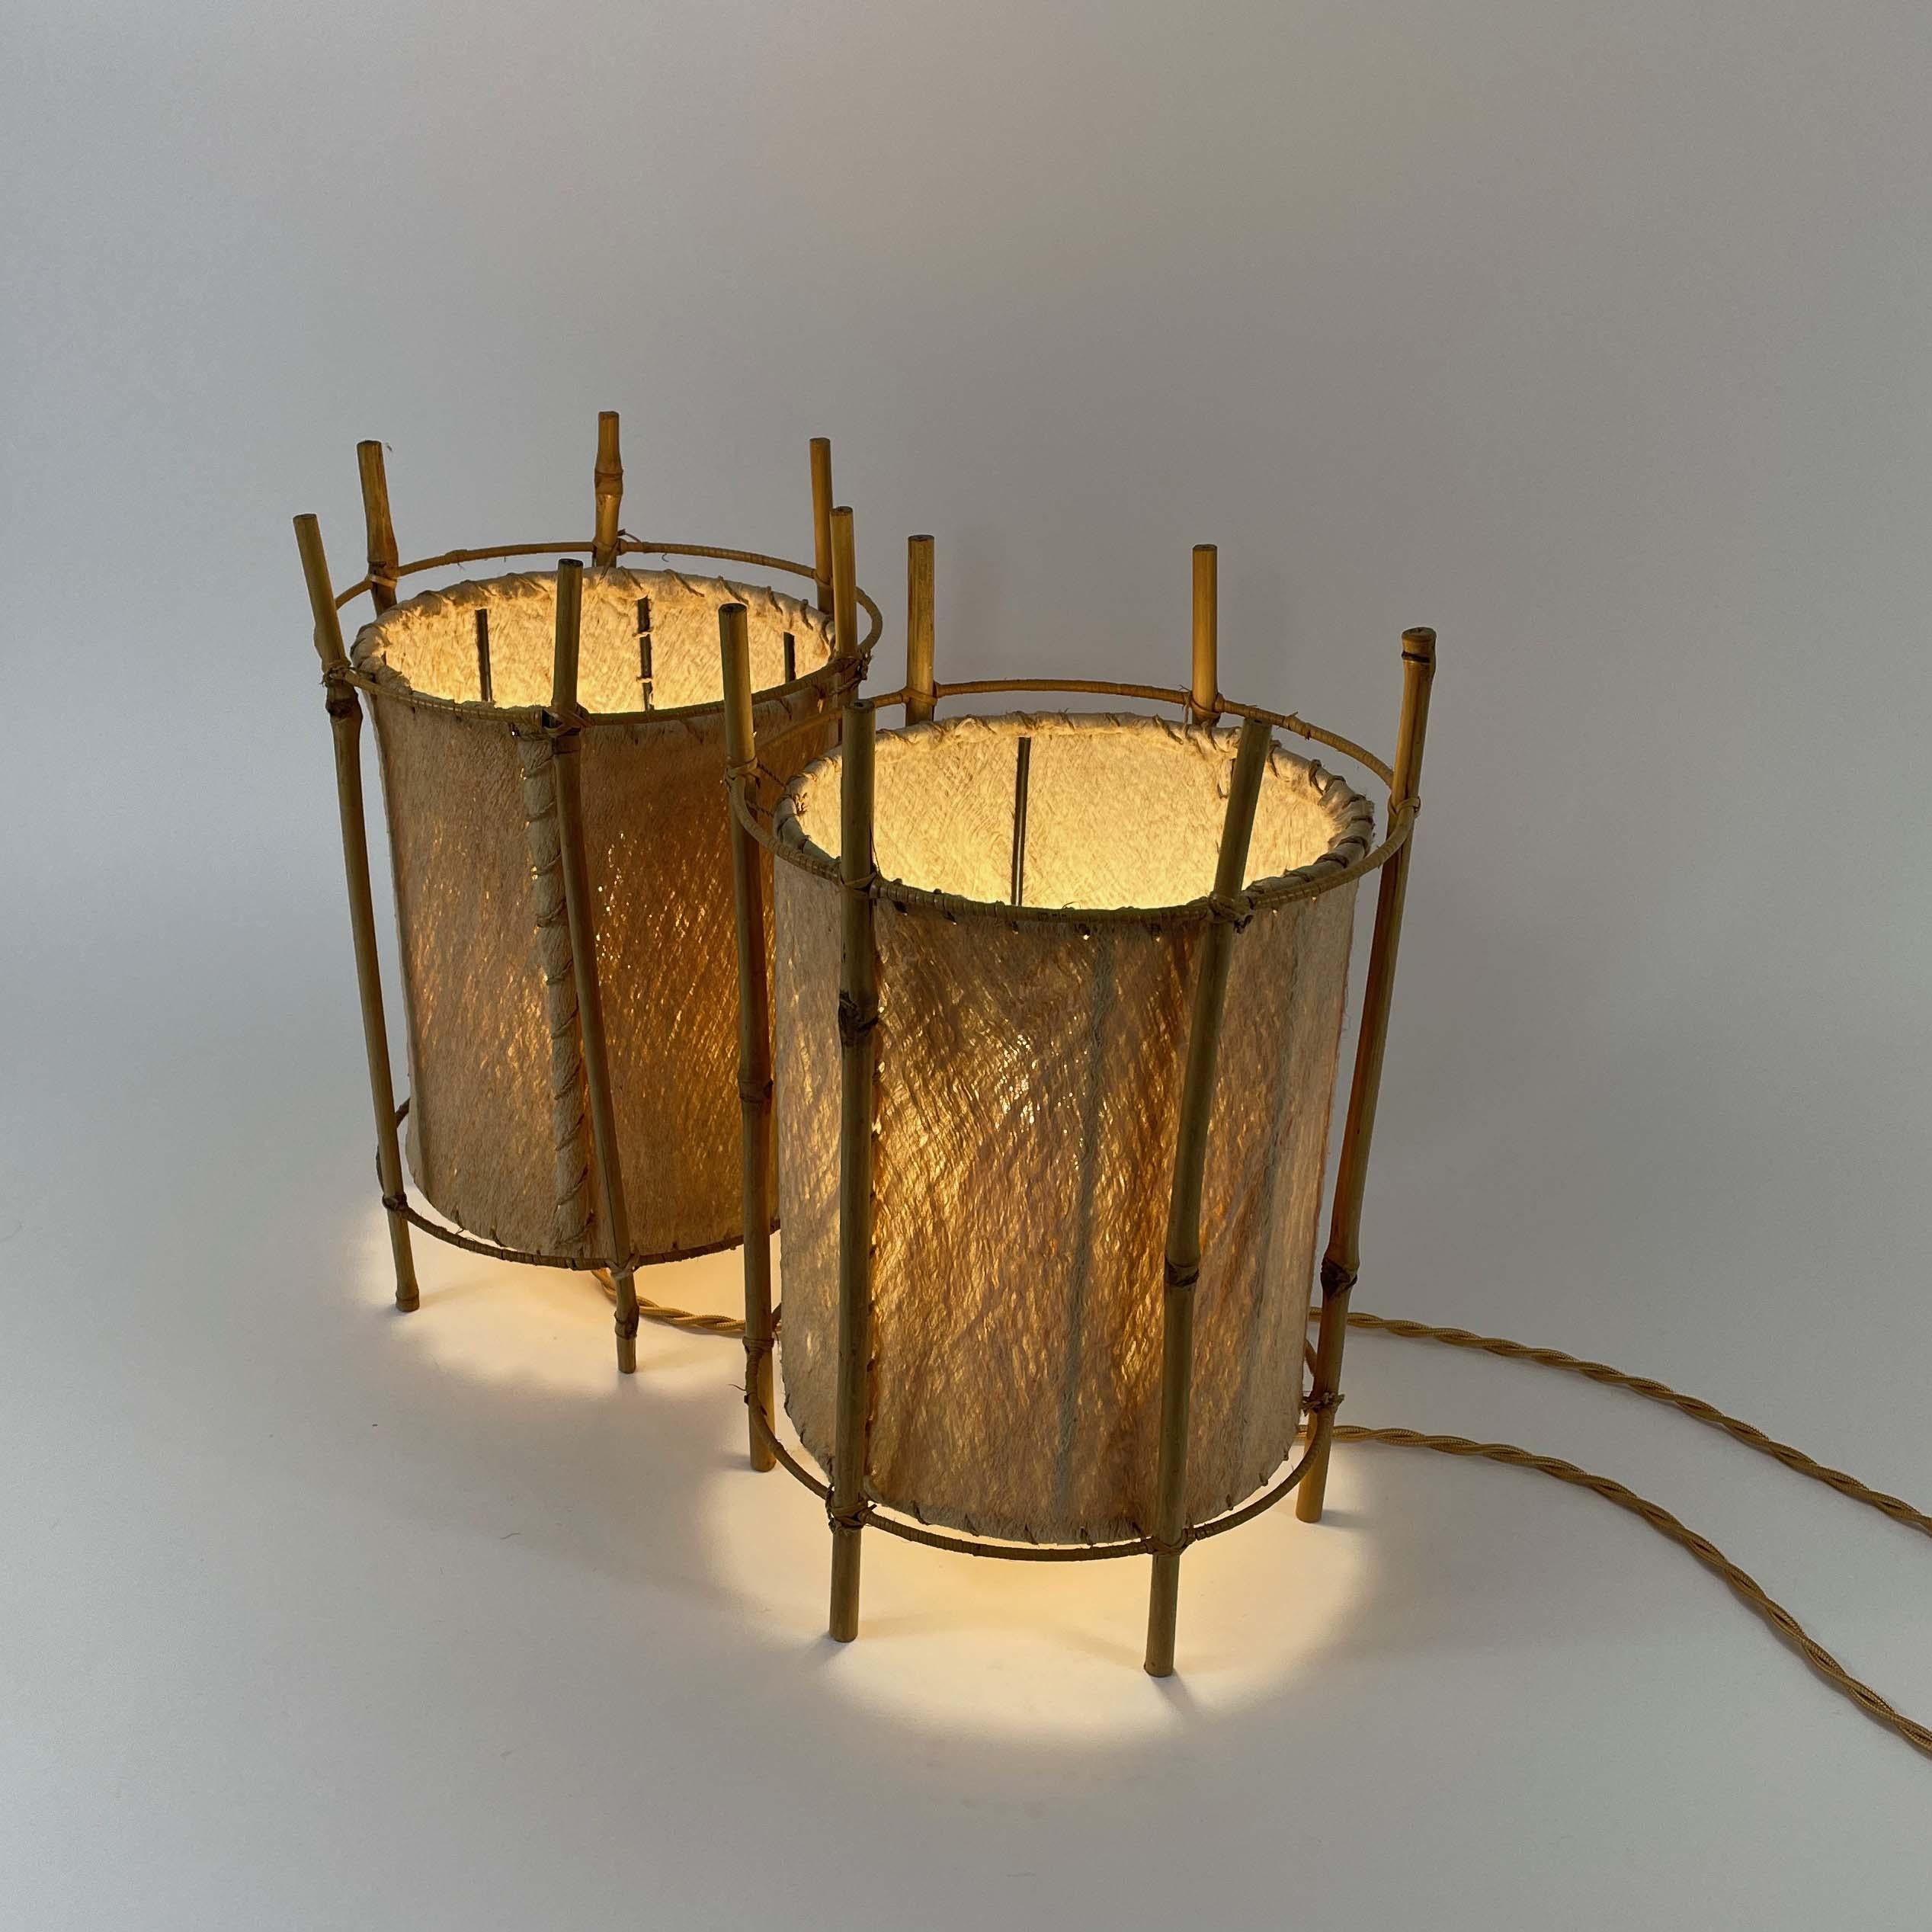 Louis Sognot Bamboo & Parchment Table Lamps, France 1950s For Sale 6